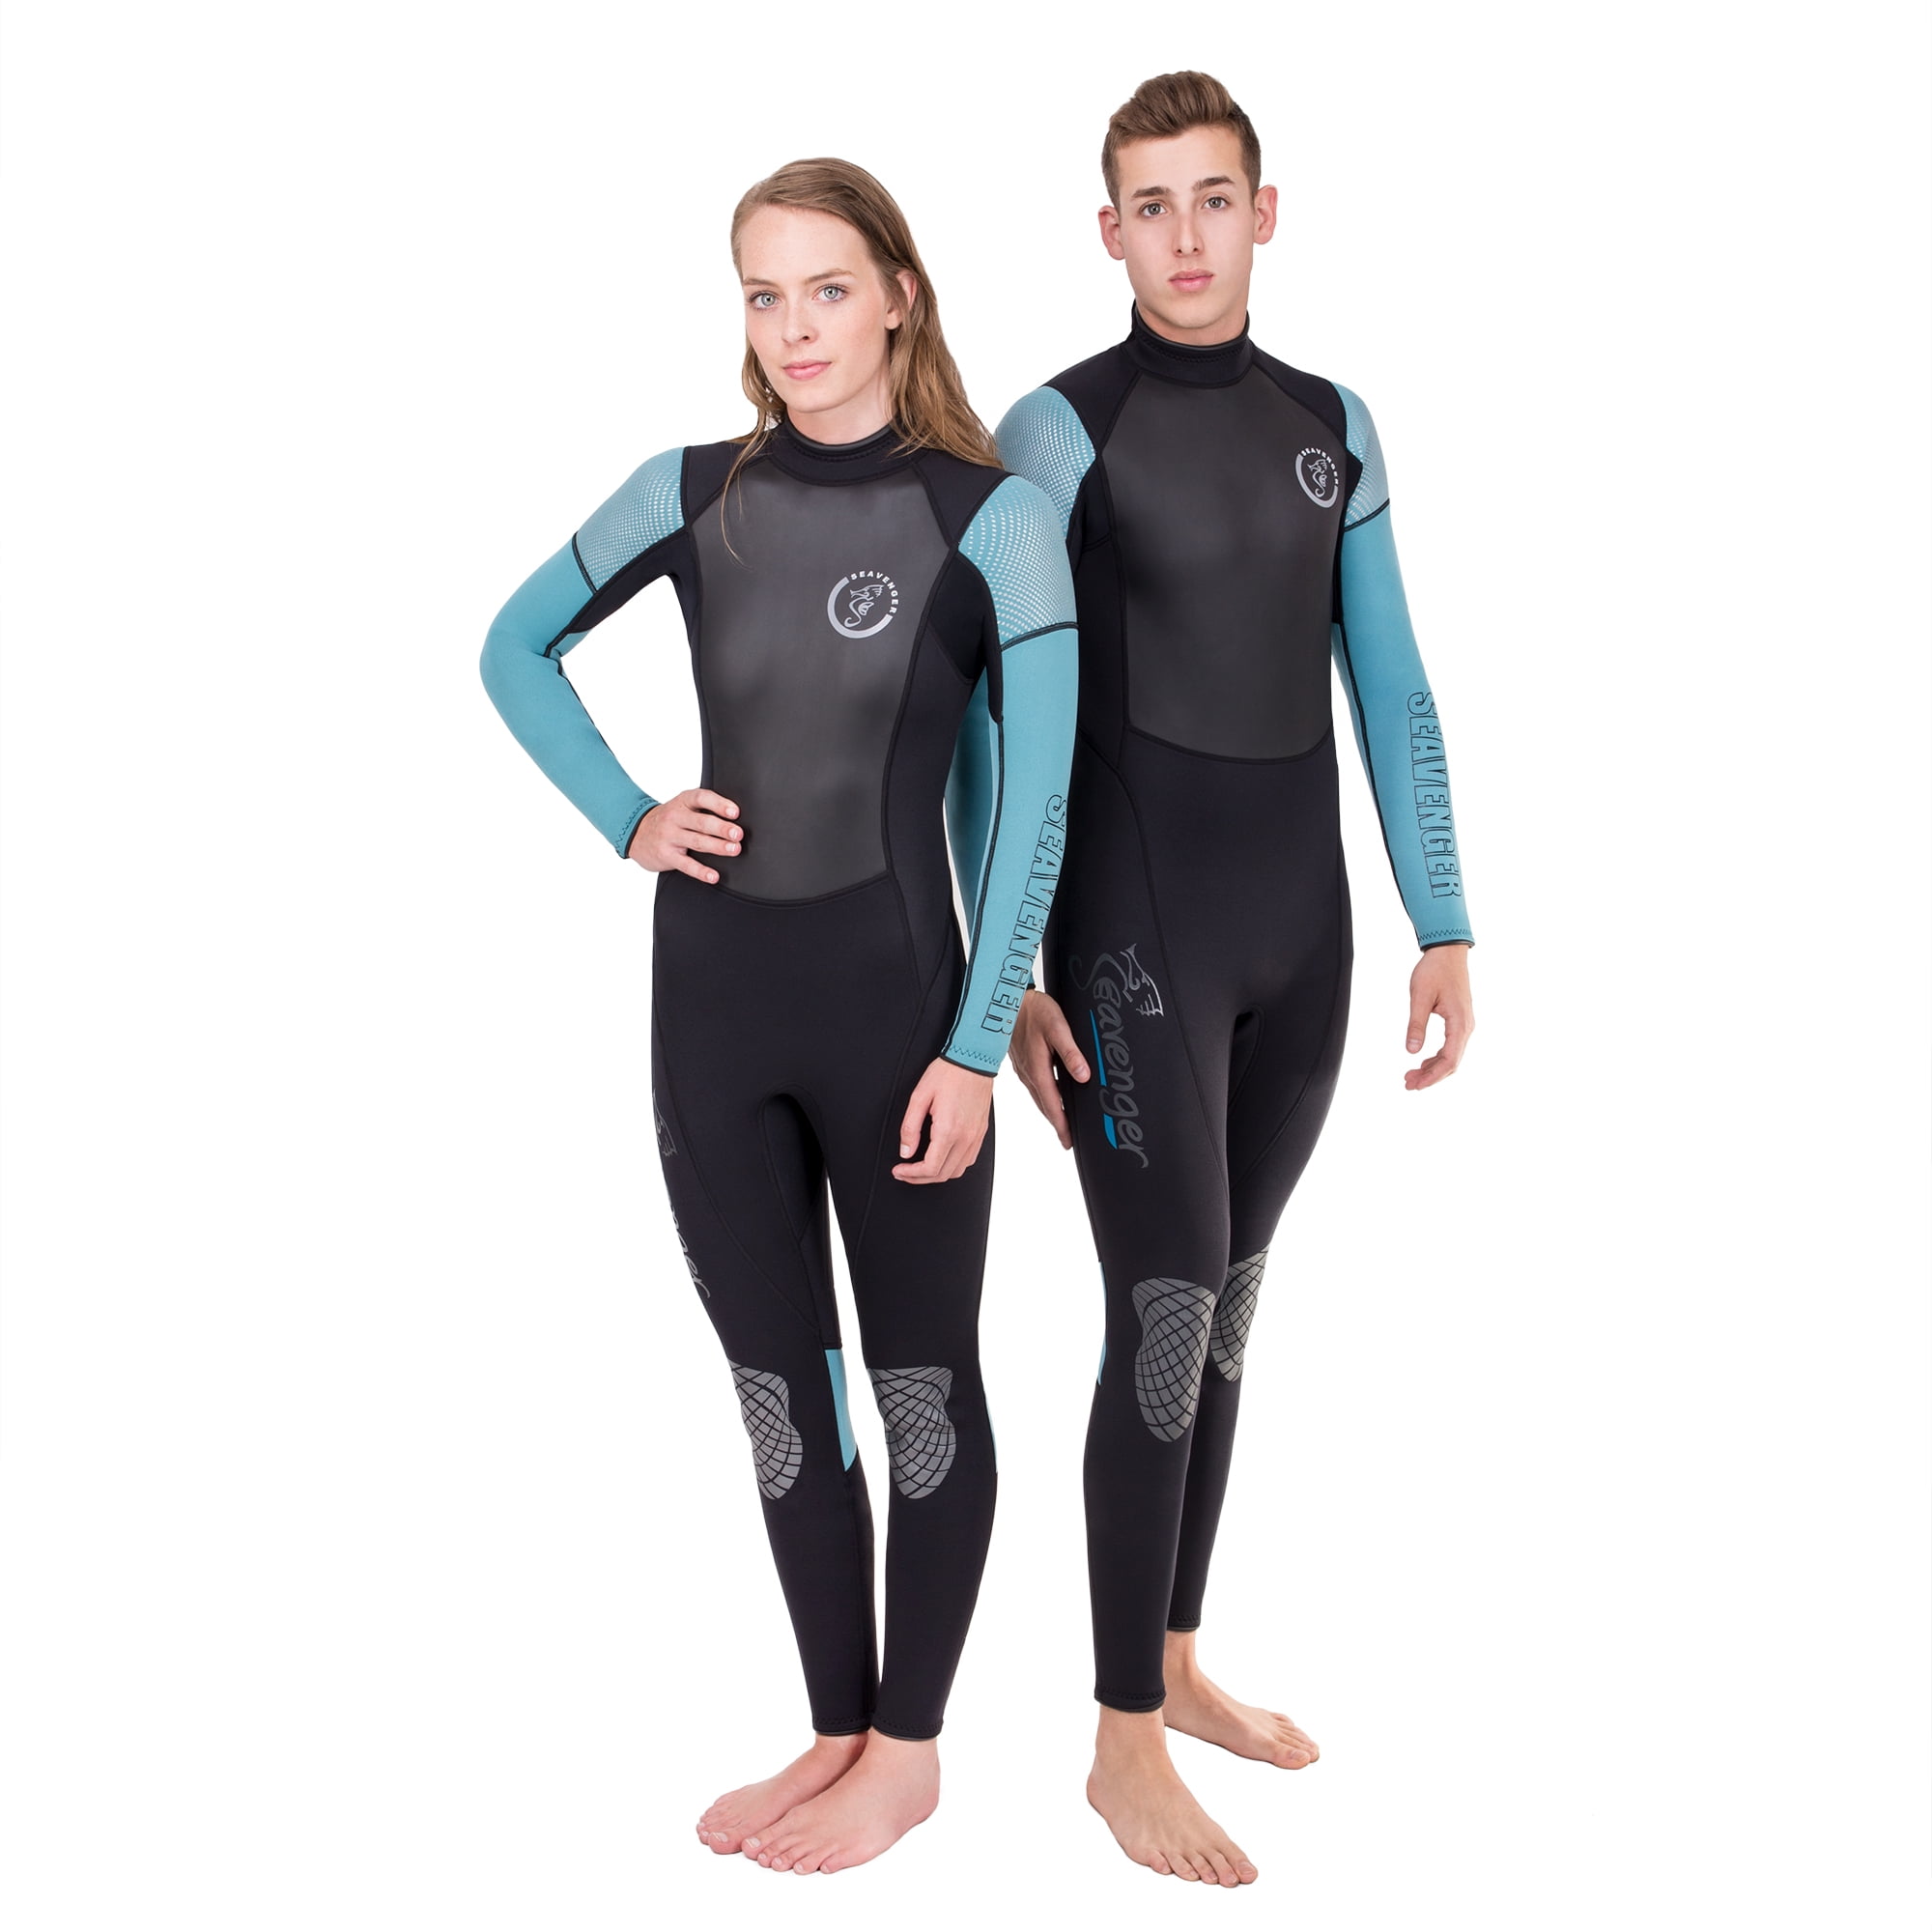 Surfing in Mens and Womens Sizes Seavenger Odyssey 3mm Neoprene Wetsuit with Stretch Panels for Snorkeling Scuba Diving 